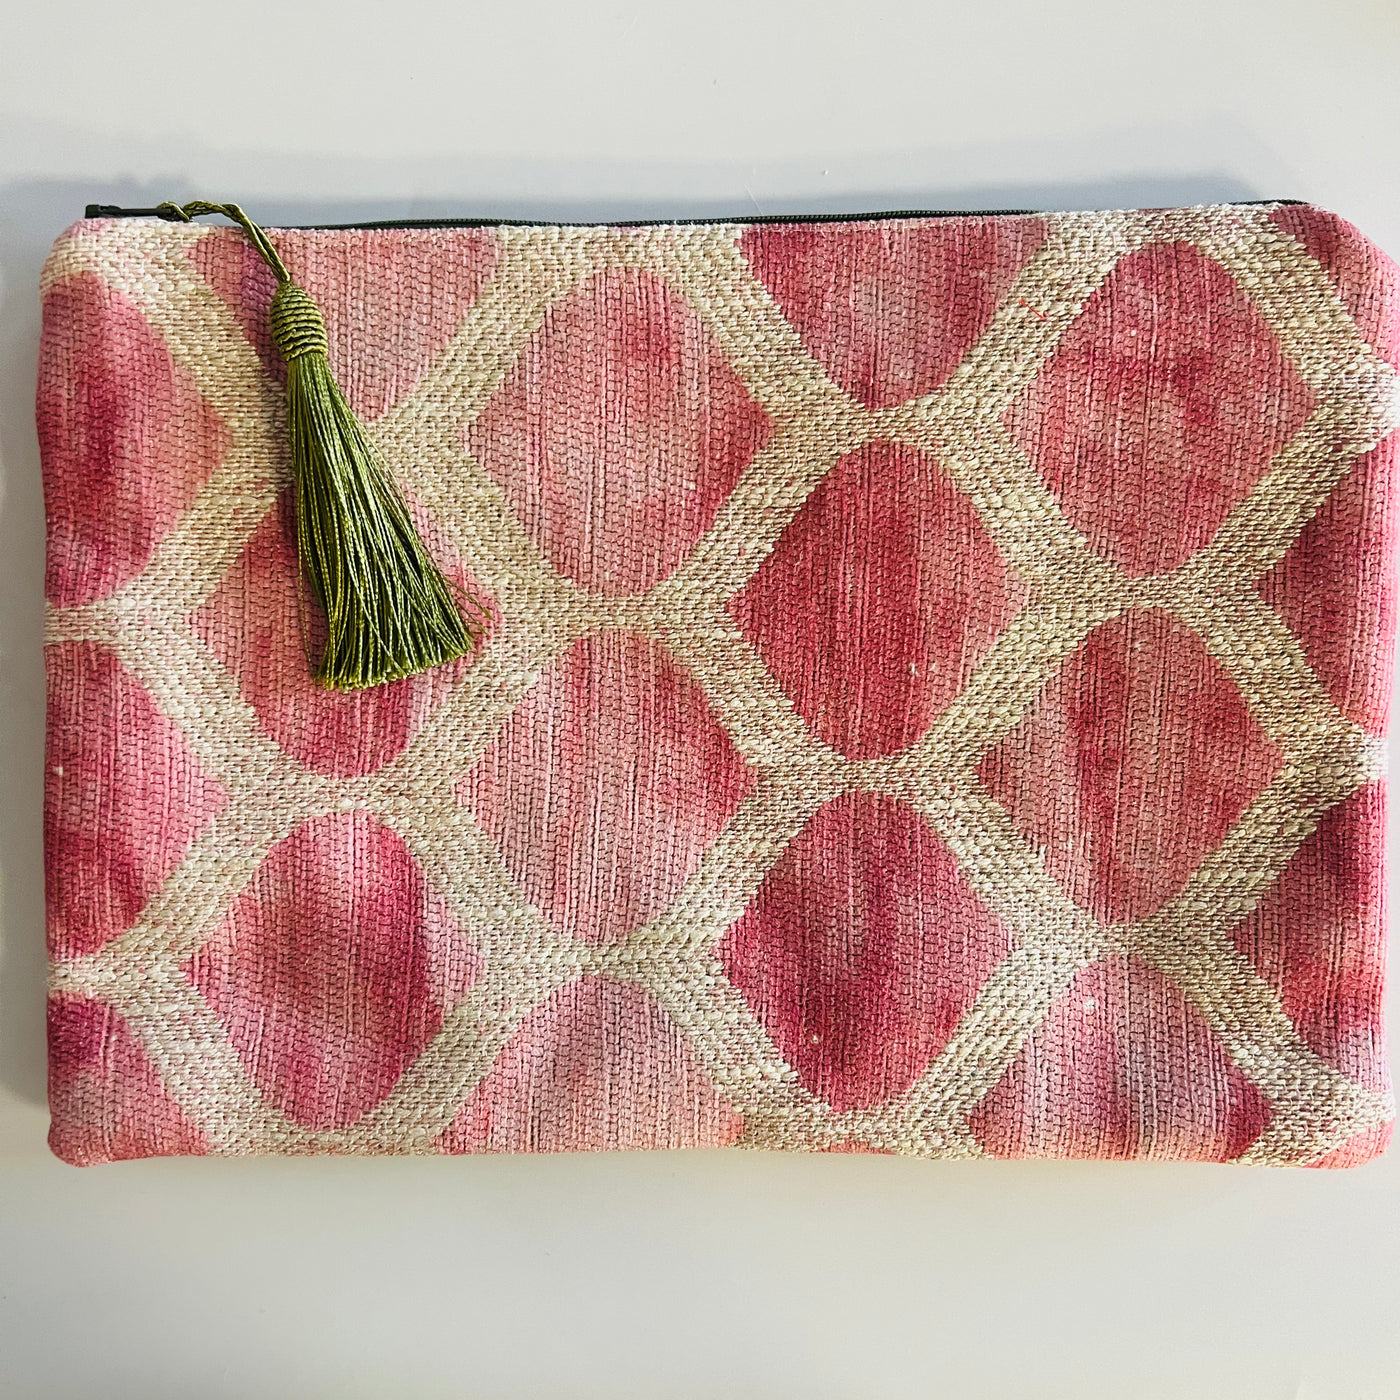 Dusty Rose and Cream Fabric Clutch